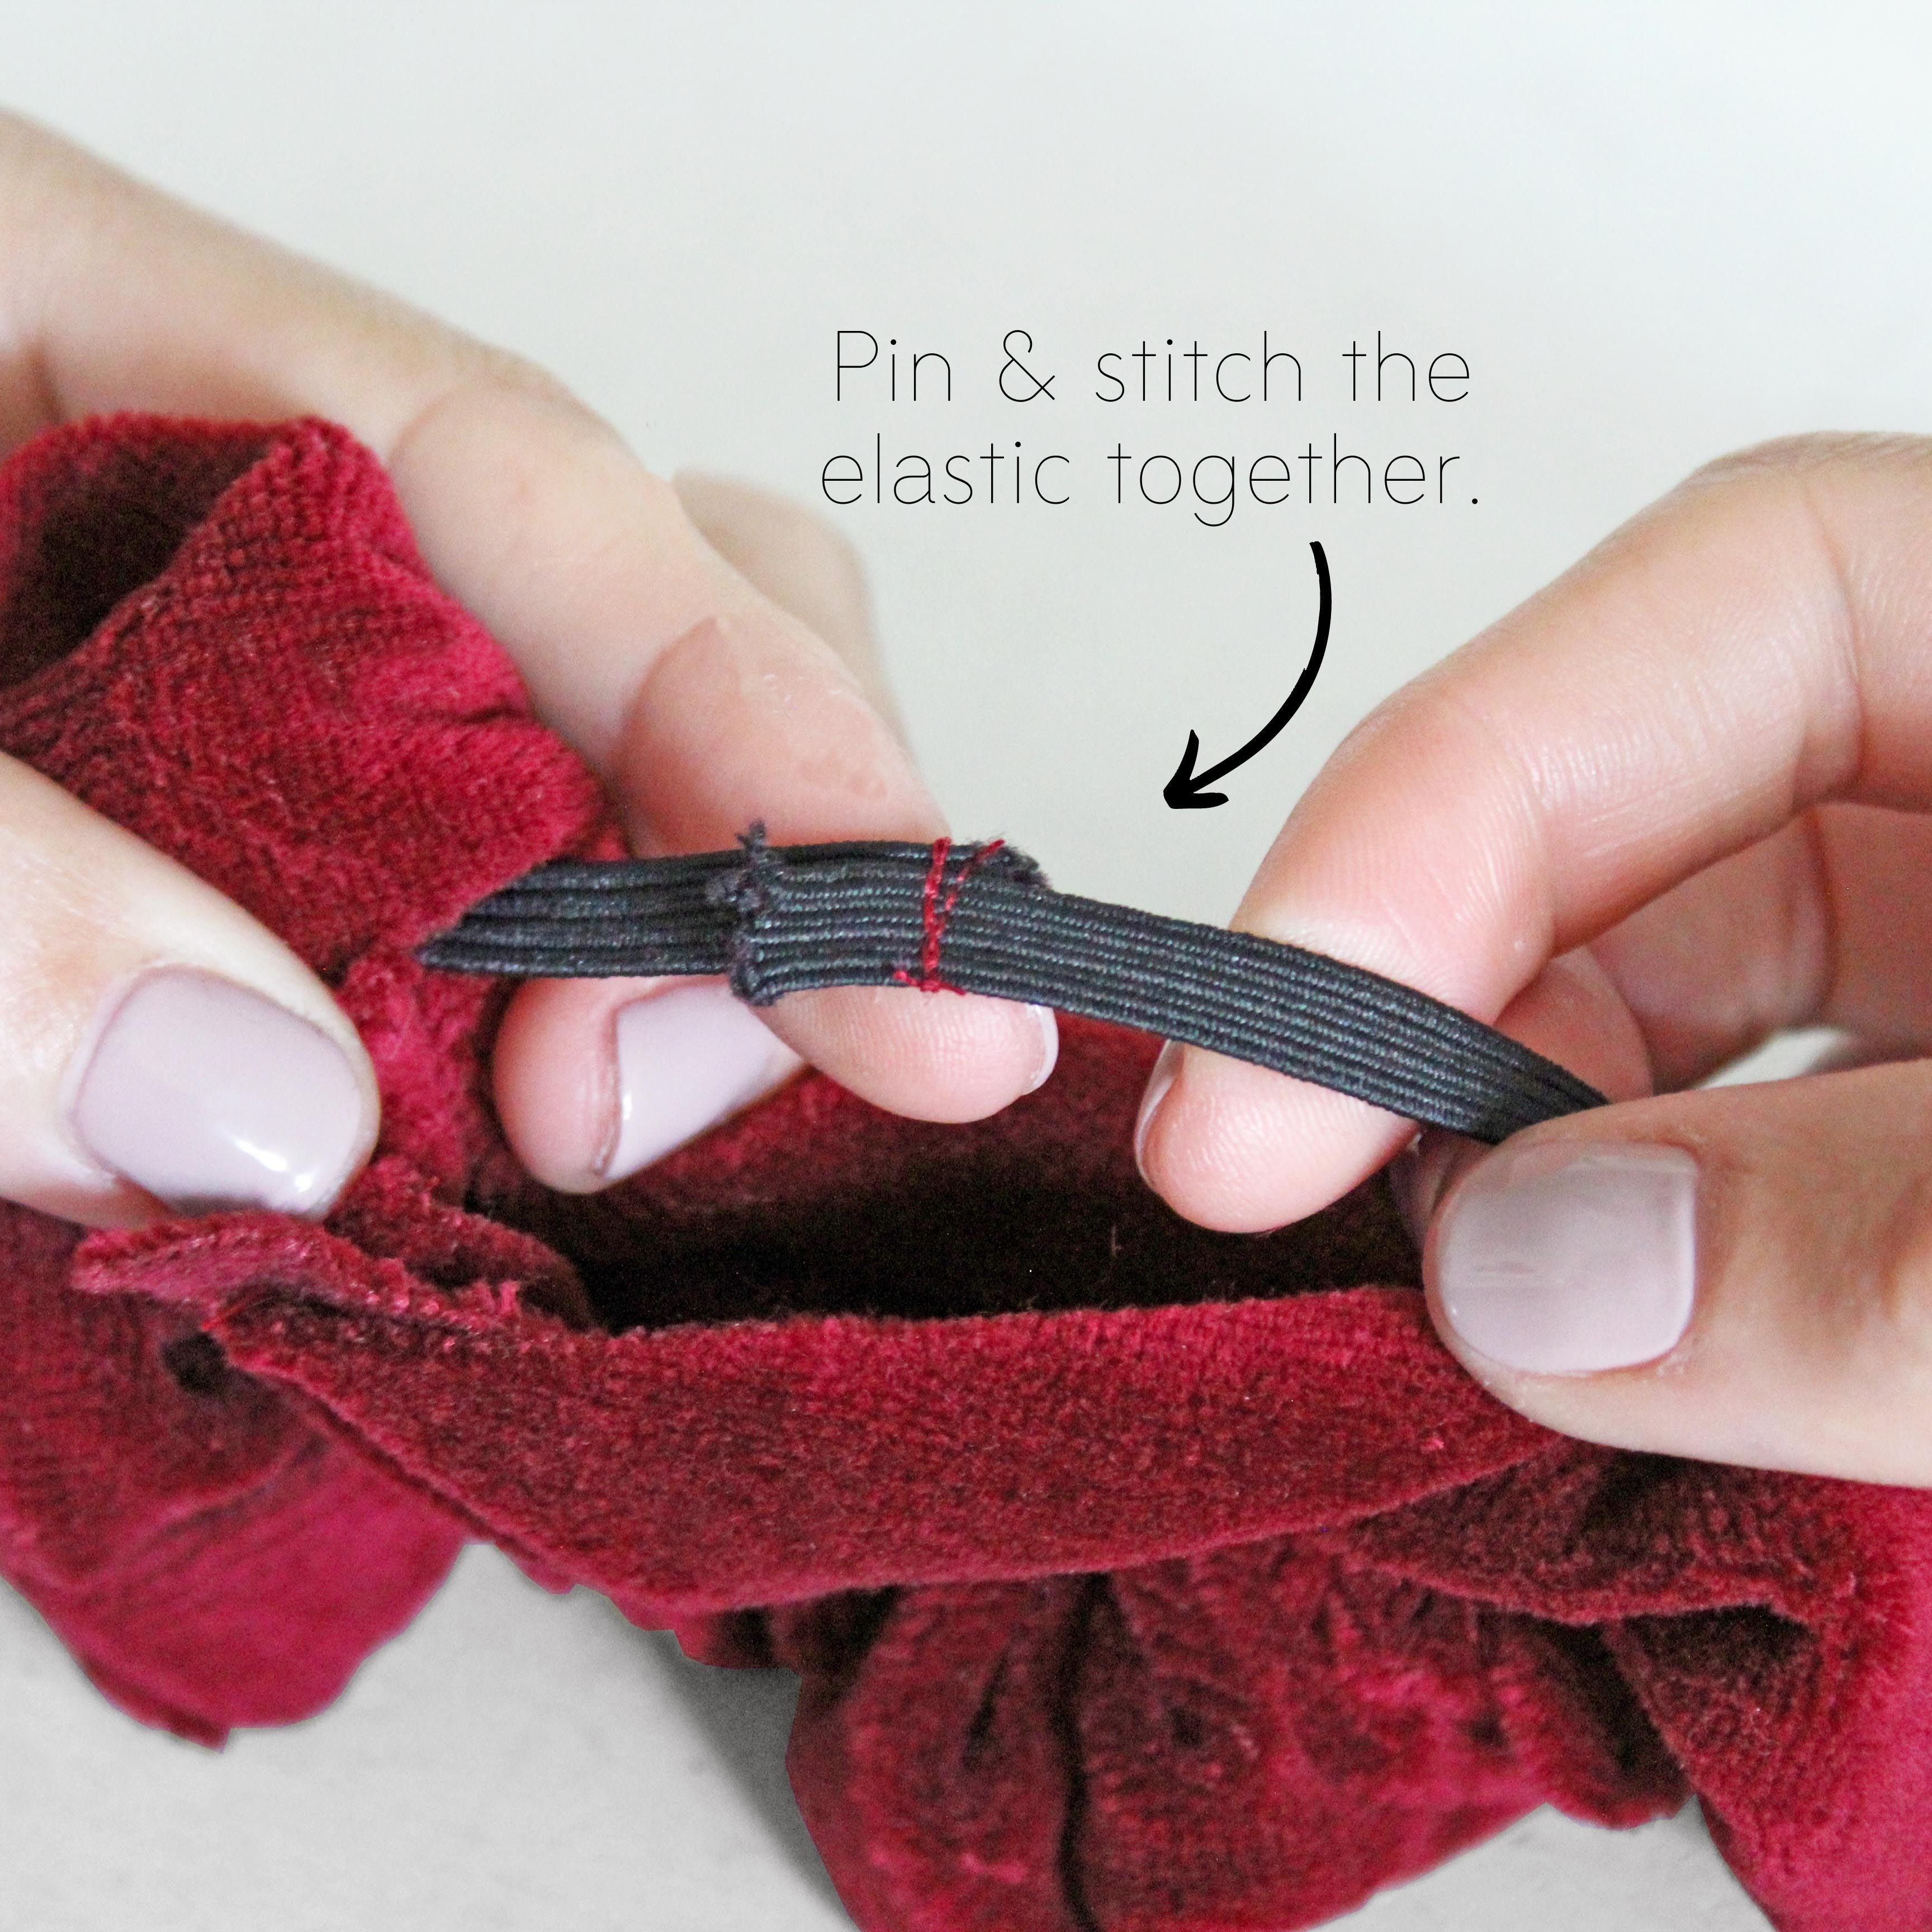 How To Make A Scrunchie DIY Sewing Tutorial: Step 5.1